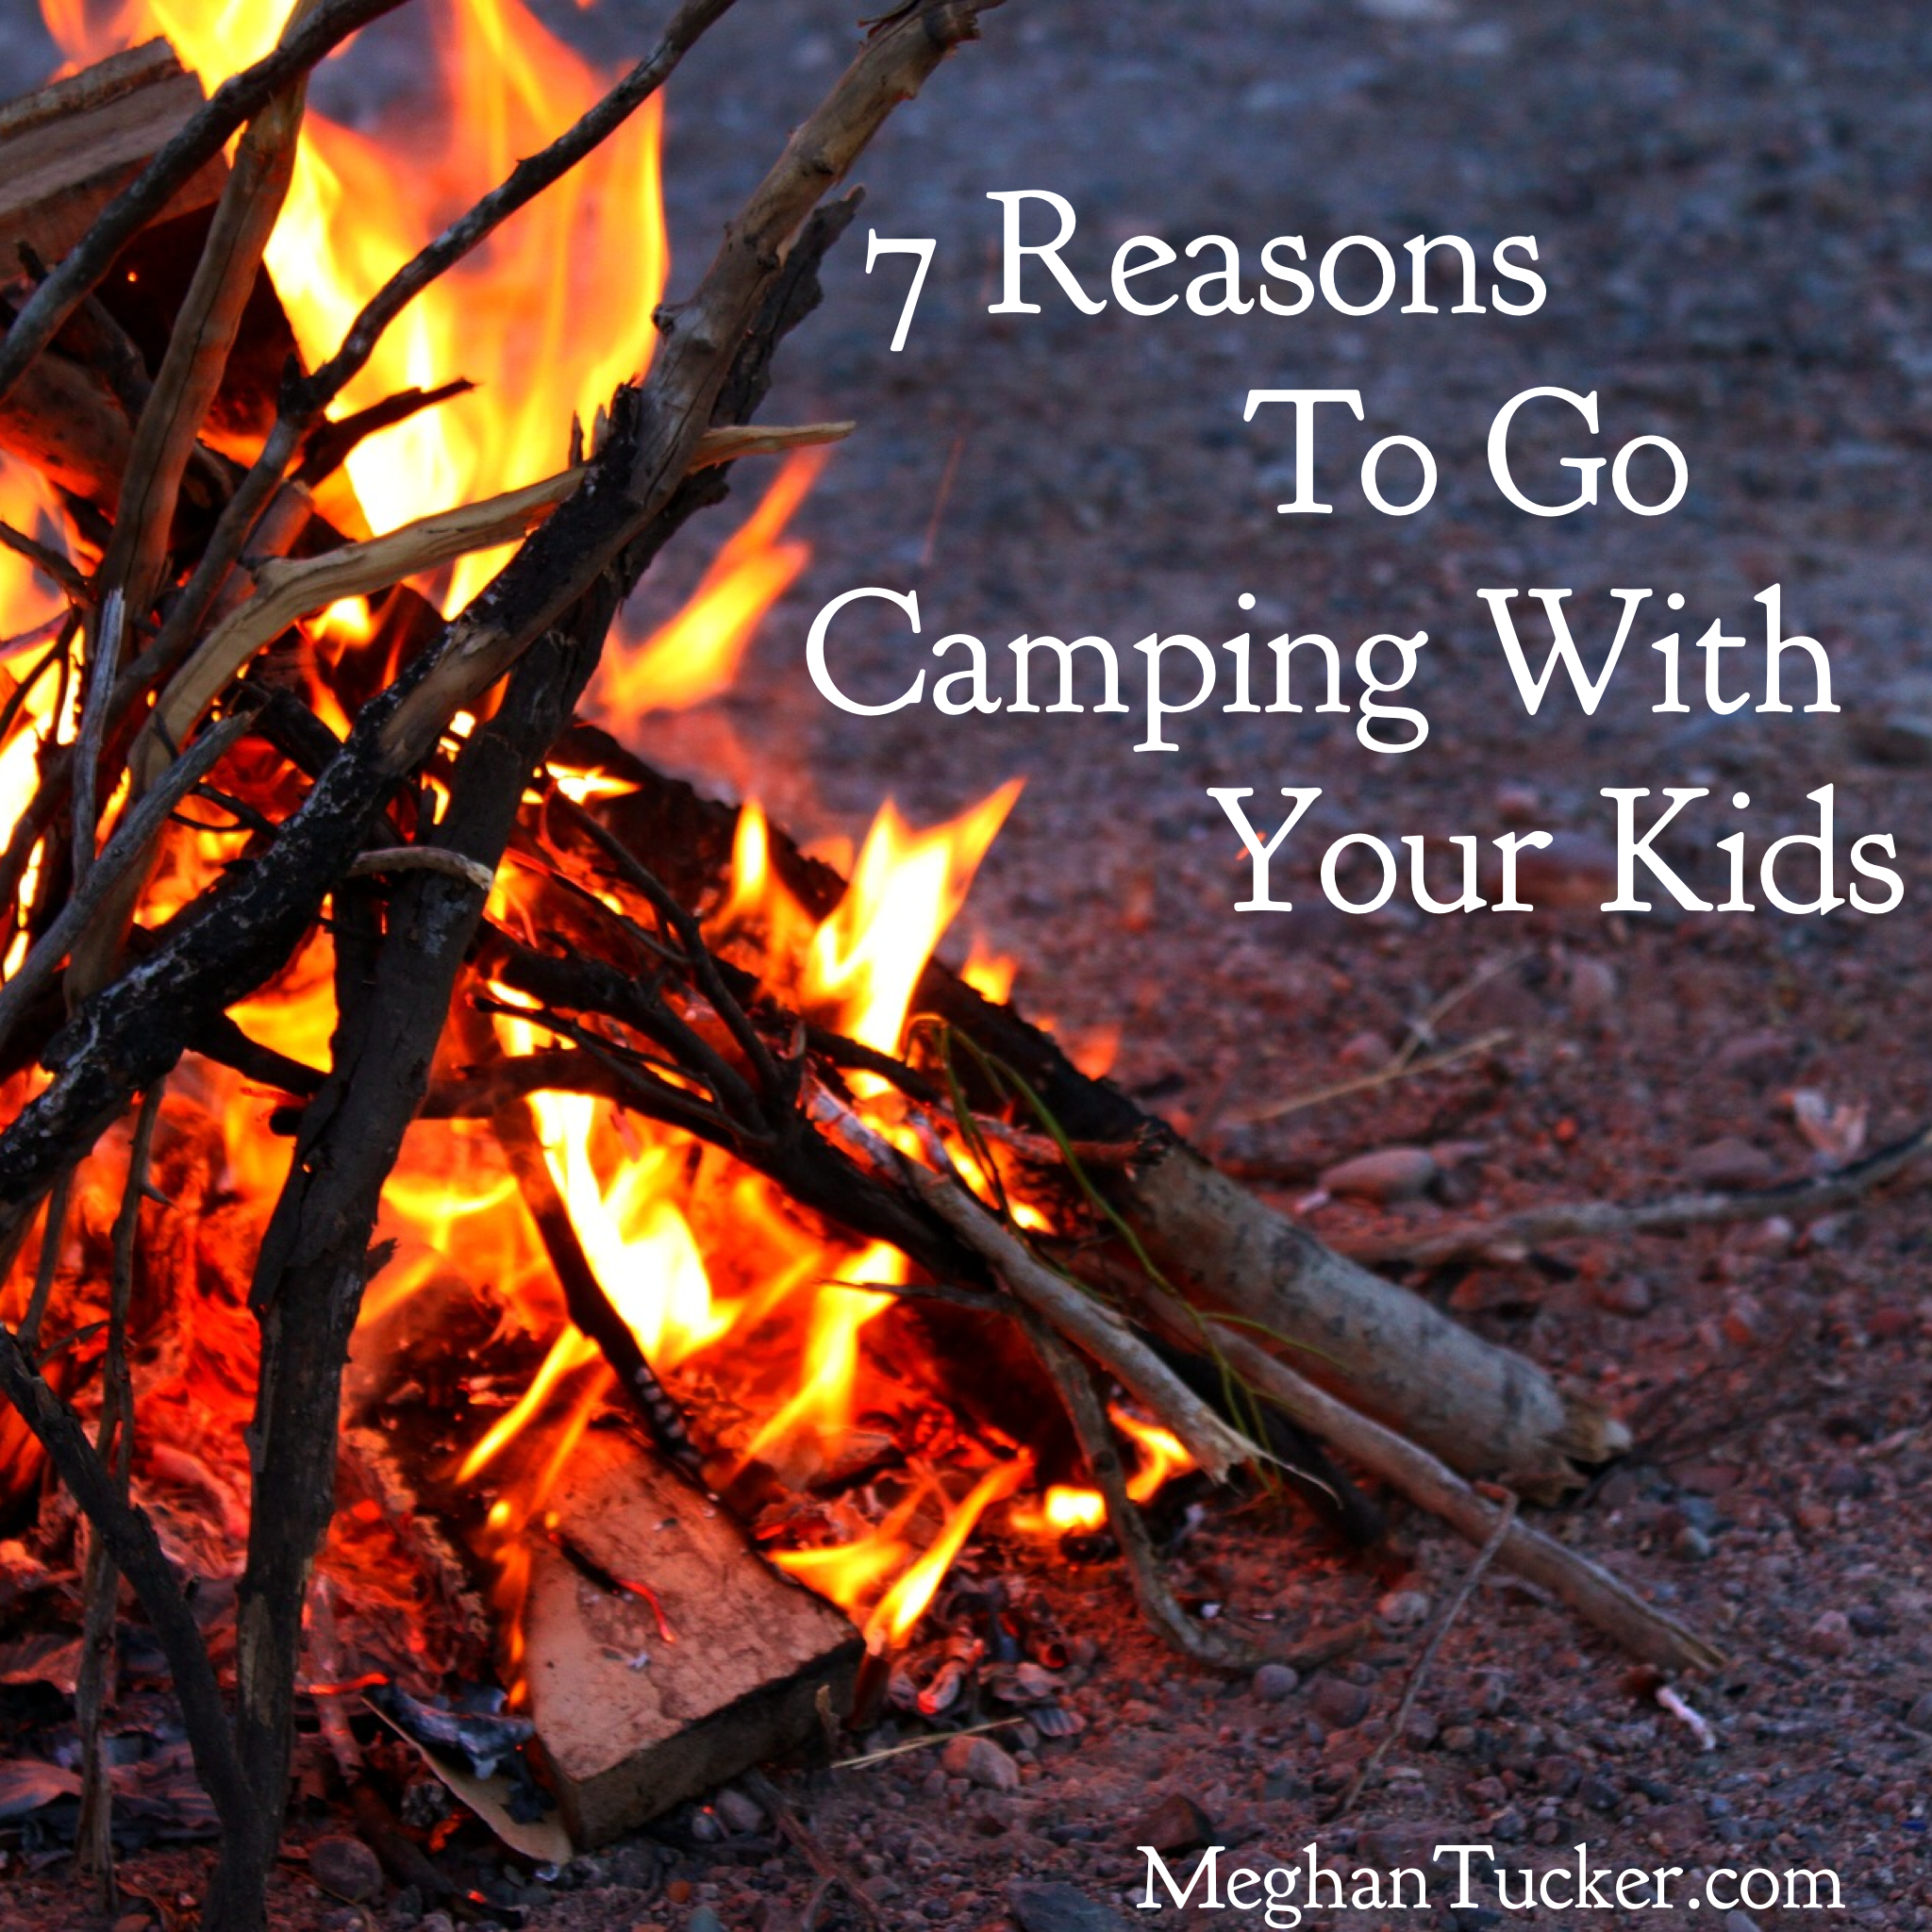 7 Reasons to Go Camping With Your Kids